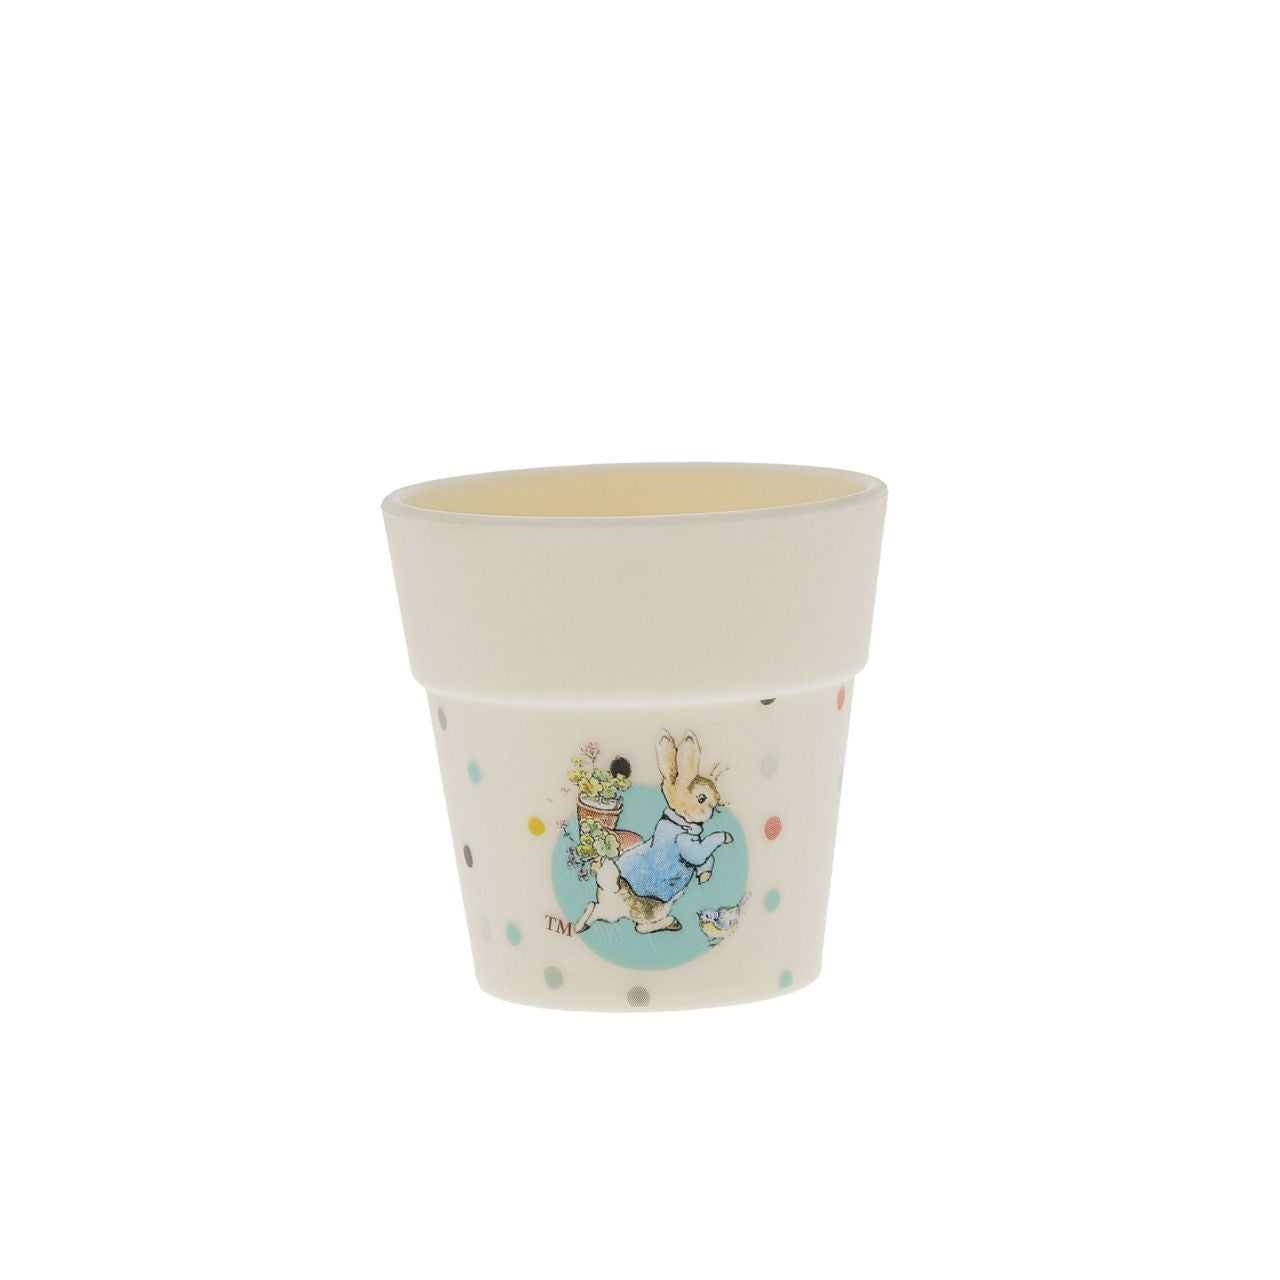 Peter Rabbit Egg Cup Set  Introducing this brand new at home with Peter Rabbit collection. There's nothing quite like a fun Peter Rabbit motif to entice those little tummies to clear their plates. Make mealtimes fun and practical with this egg cup set. Highly durable and can be used at home, in the garden, or on the go.